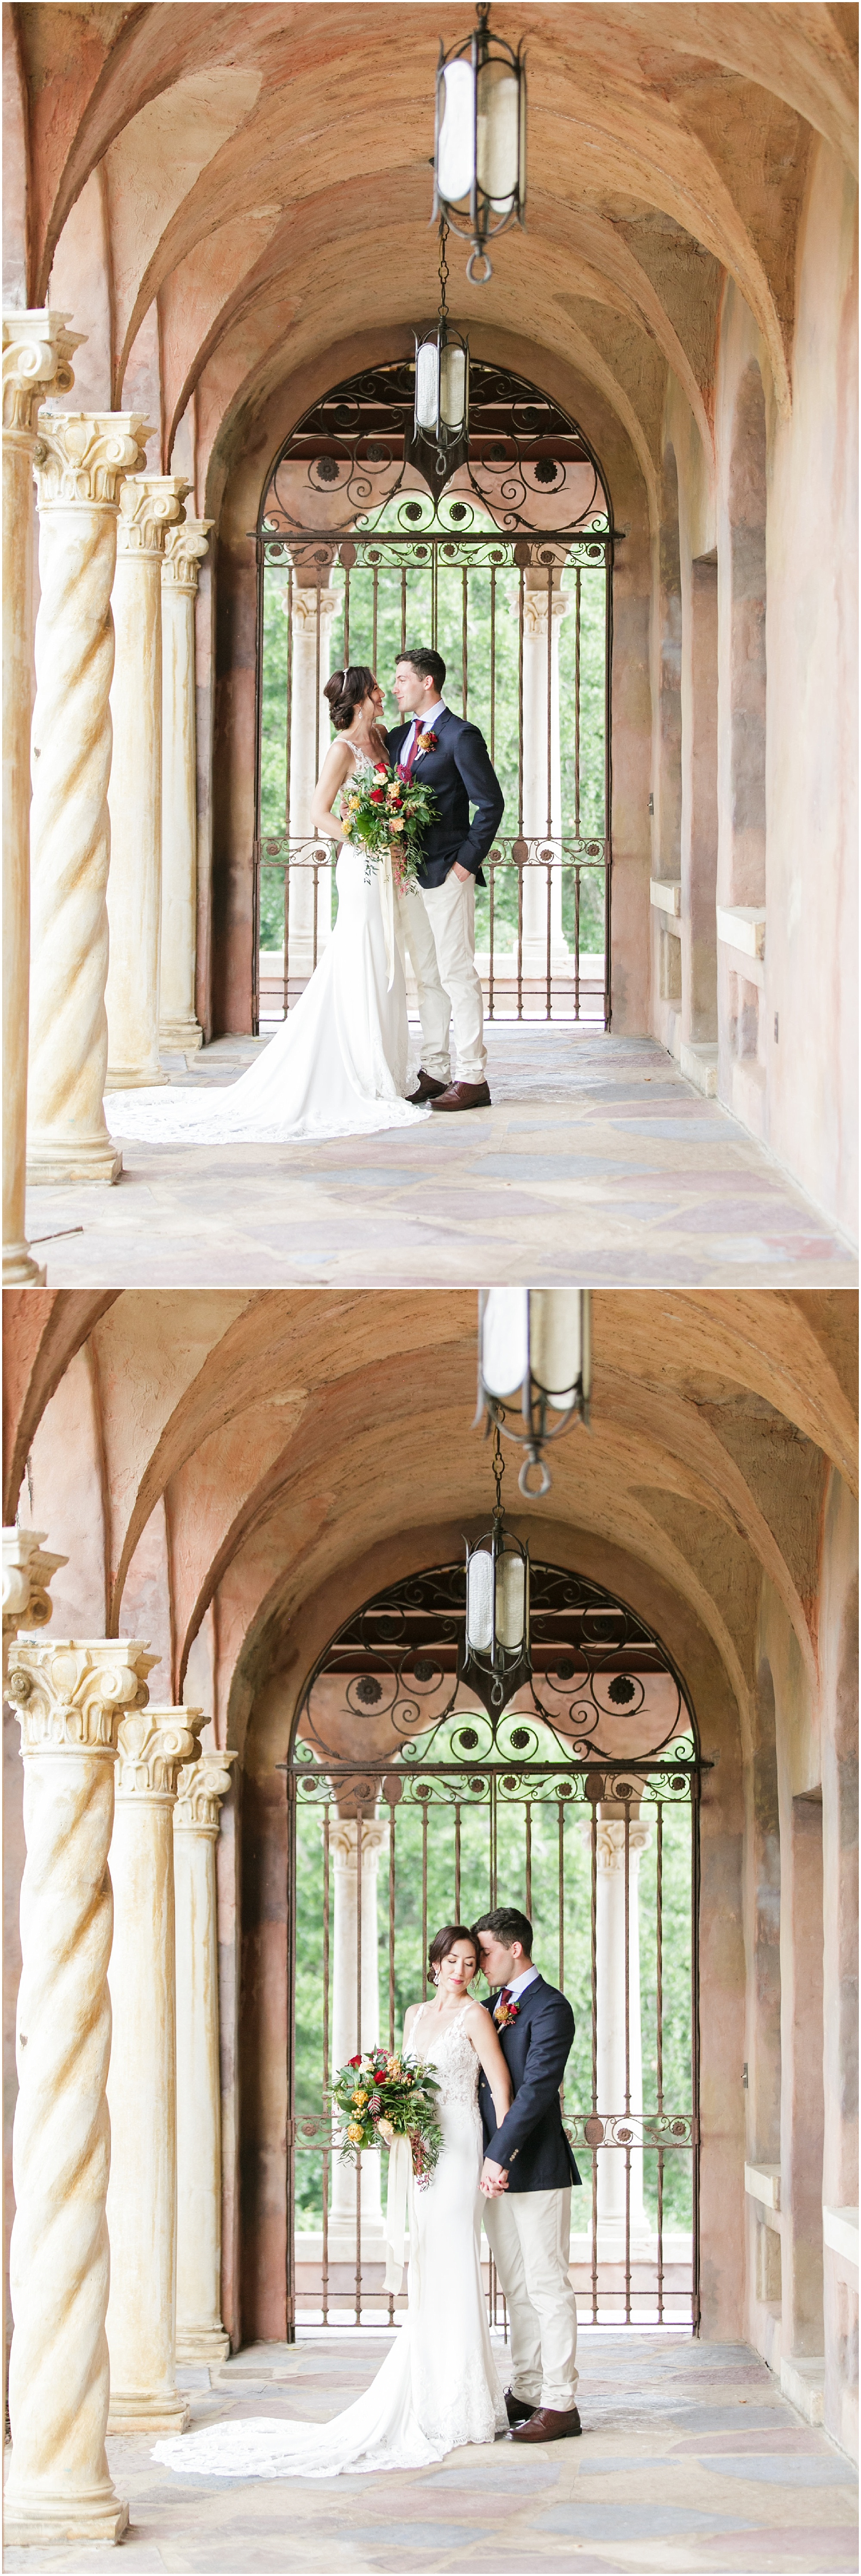 Bride and groom taking portraits in the breezeway at the Howey Mansion.